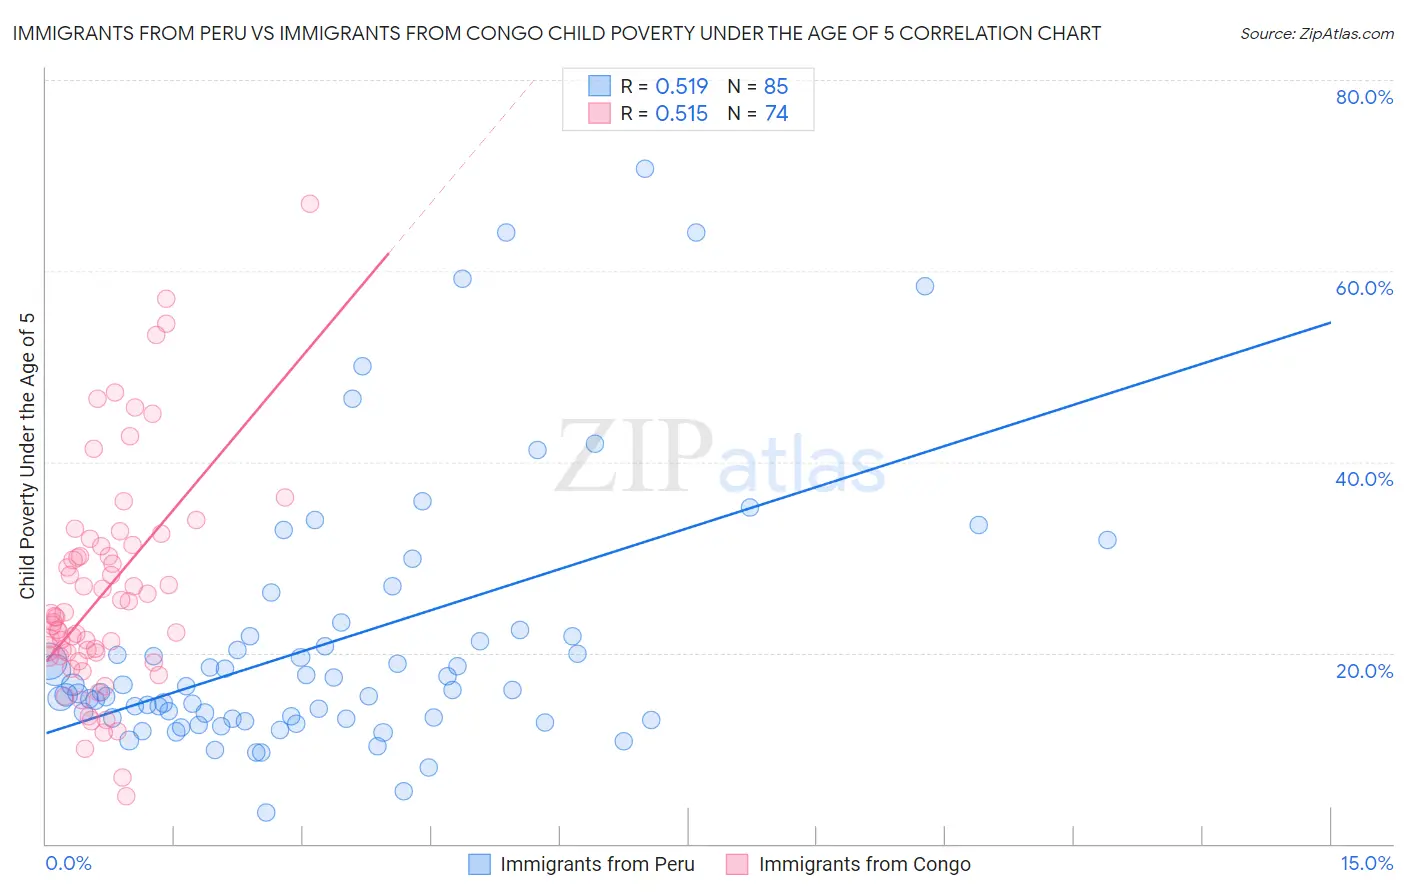 Immigrants from Peru vs Immigrants from Congo Child Poverty Under the Age of 5